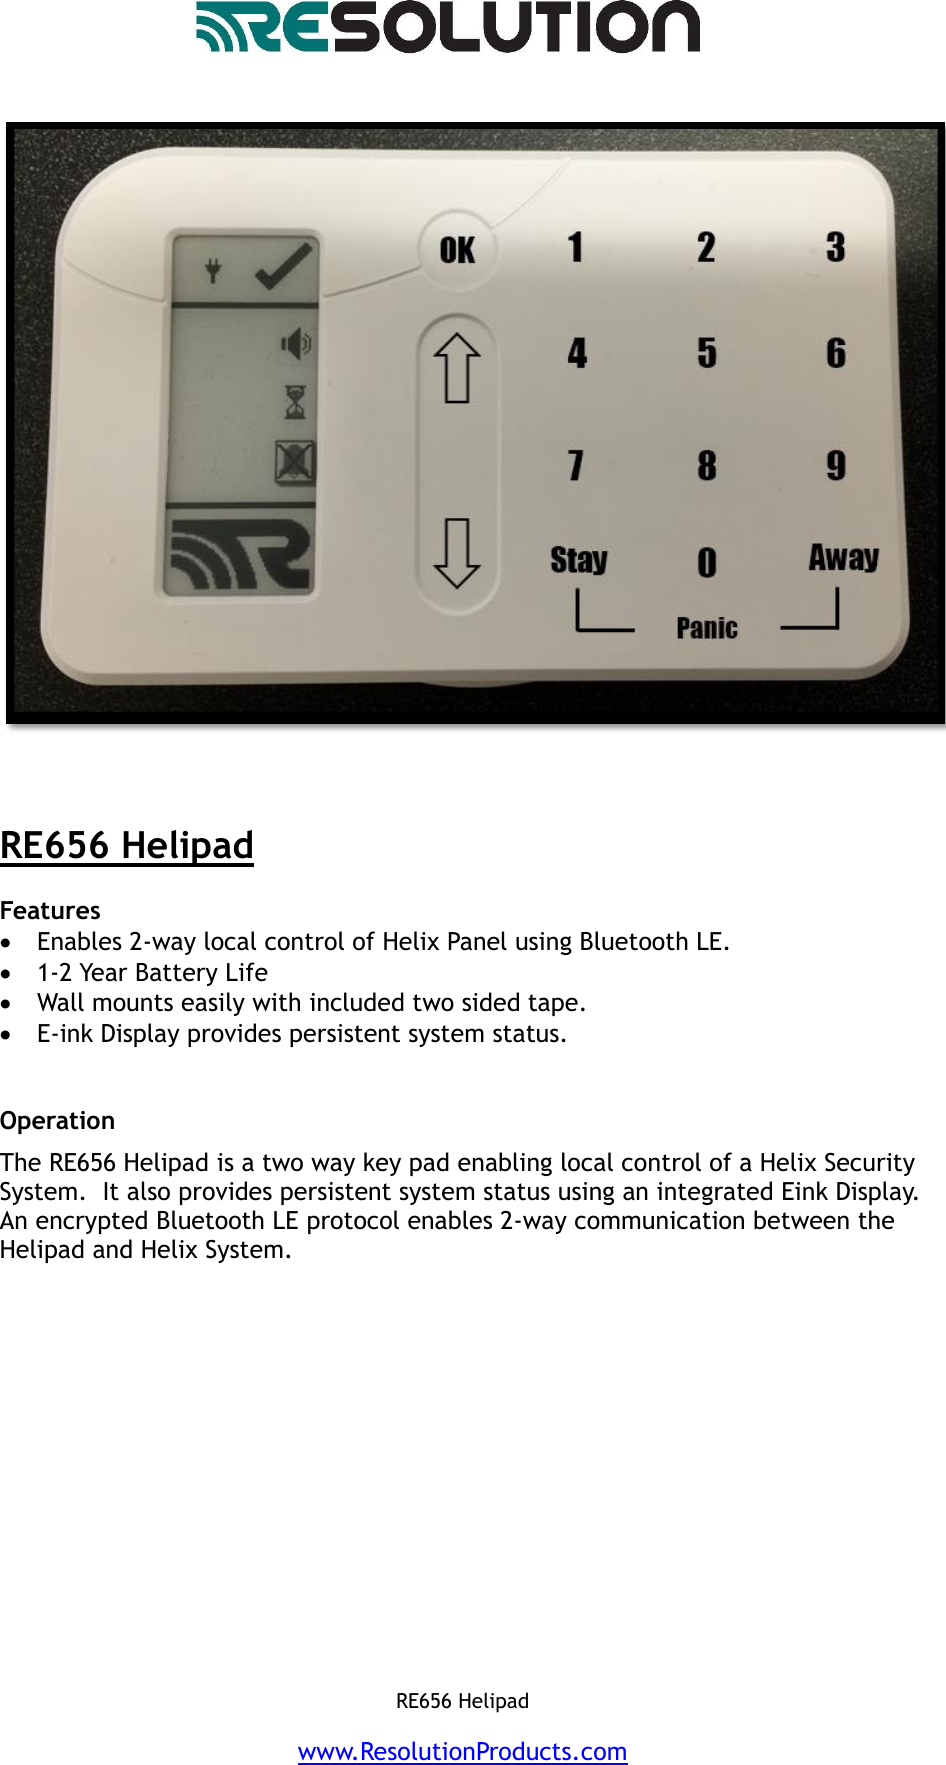   RE656 Helipad    www.ResolutionProducts.com       RE656 Helipad  Features   Enables 2-way local control of Helix Panel using Bluetooth LE.   1-2 Year Battery Life  Wall mounts easily with included two sided tape.  E-ink Display provides persistent system status.    Operation  The RE656 Helipad is a two way key pad enabling local control of a Helix Security System.  It also provides persistent system status using an integrated Eink Display.  An encrypted Bluetooth LE protocol enables 2-way communication between the Helipad and Helix System.                